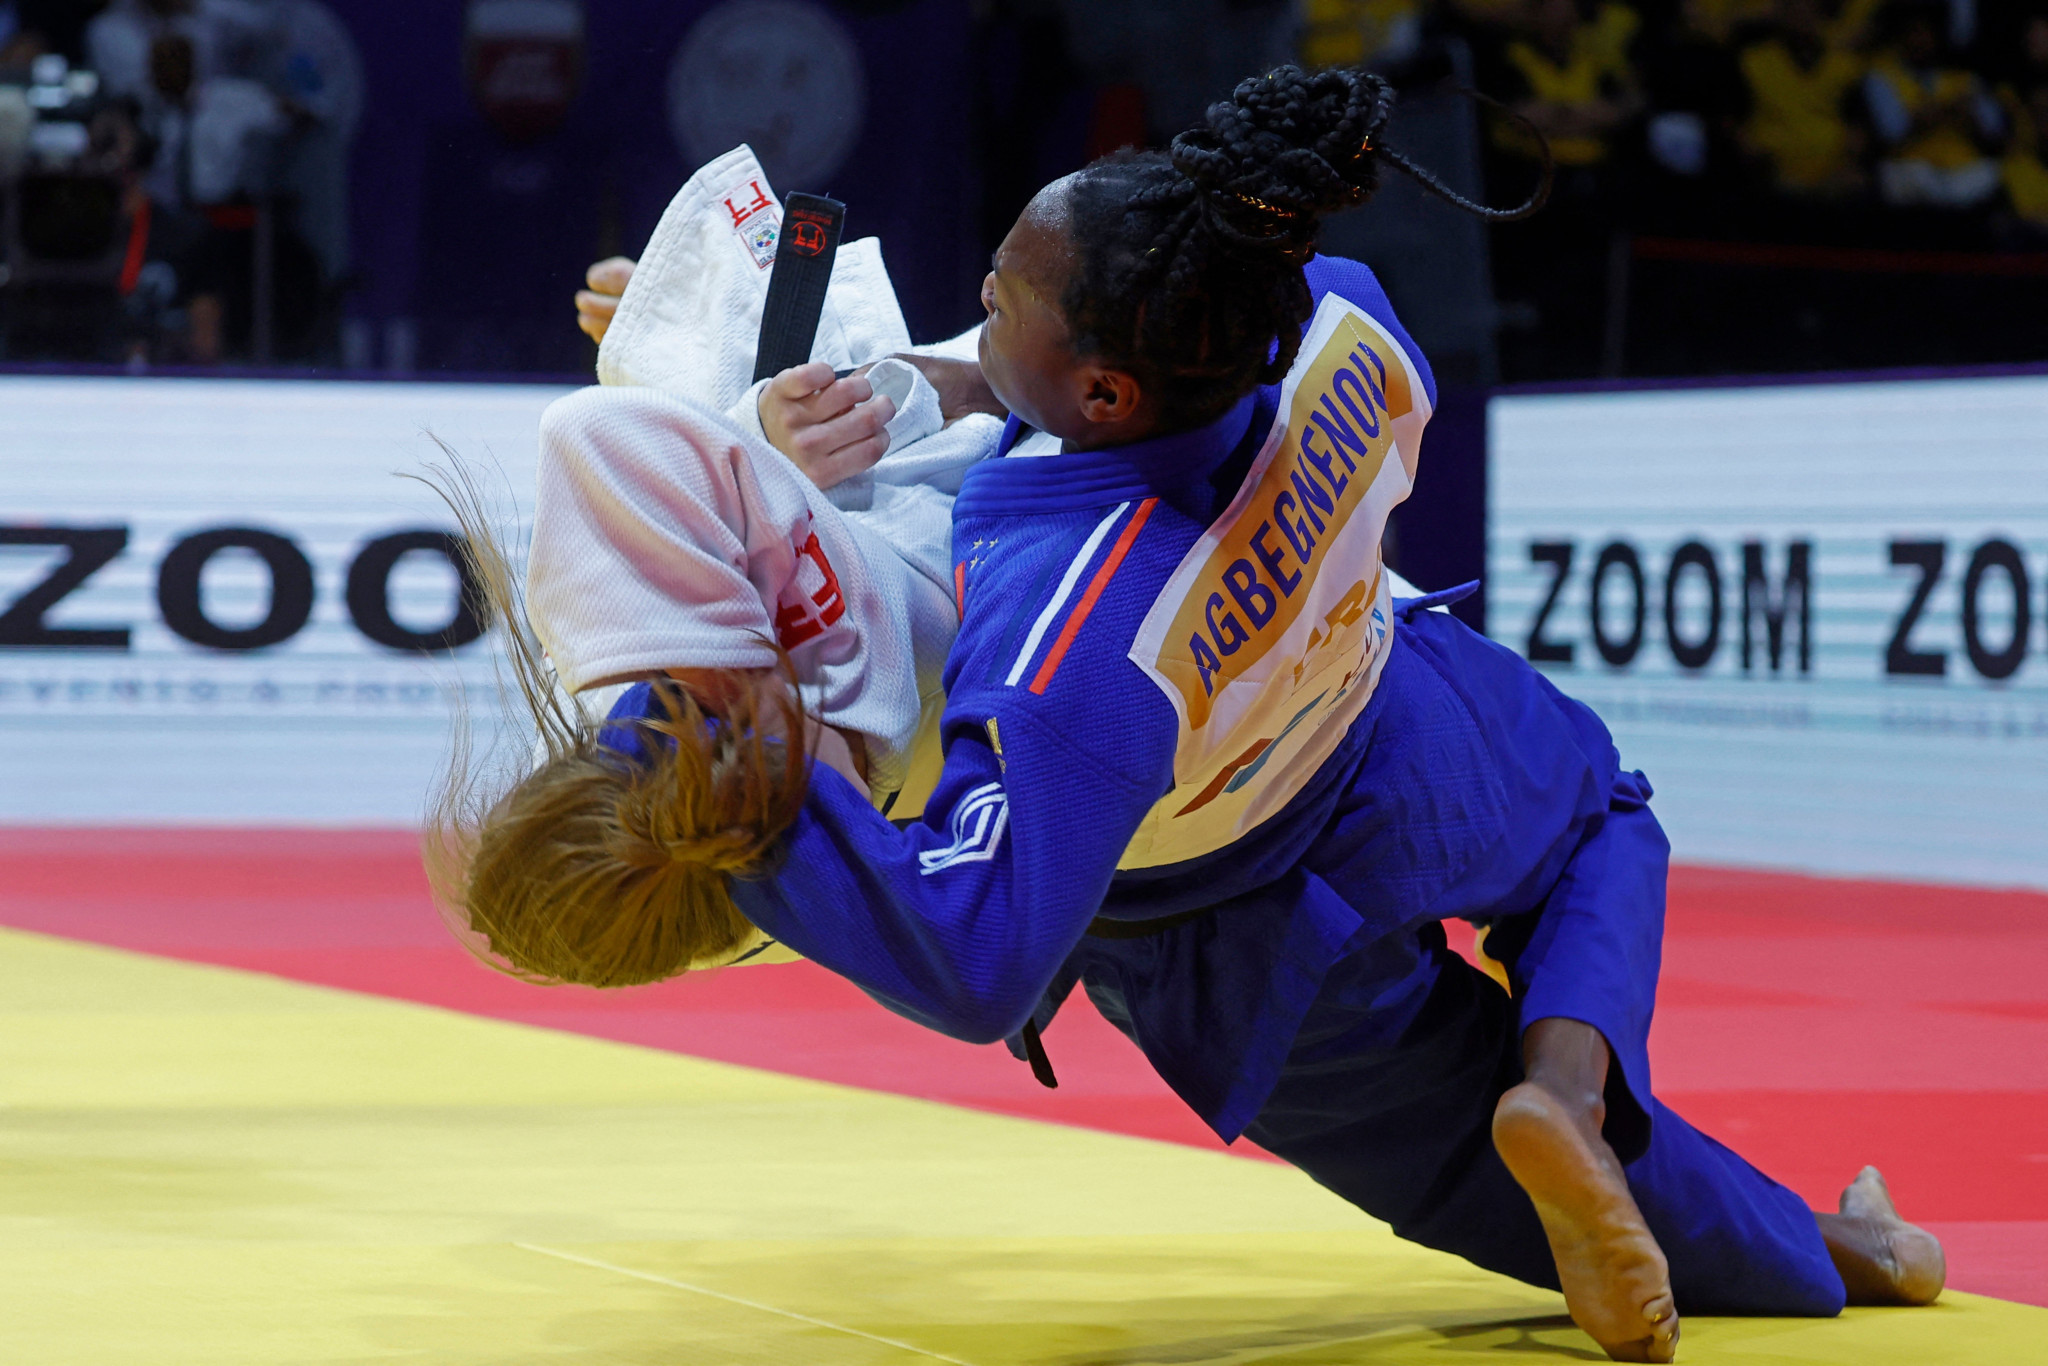 Slovenia's Andreja Leški is slammed to the floor during her women's under-63kg final defeat to France's Clarisse Agbégnénou ©Getty Images